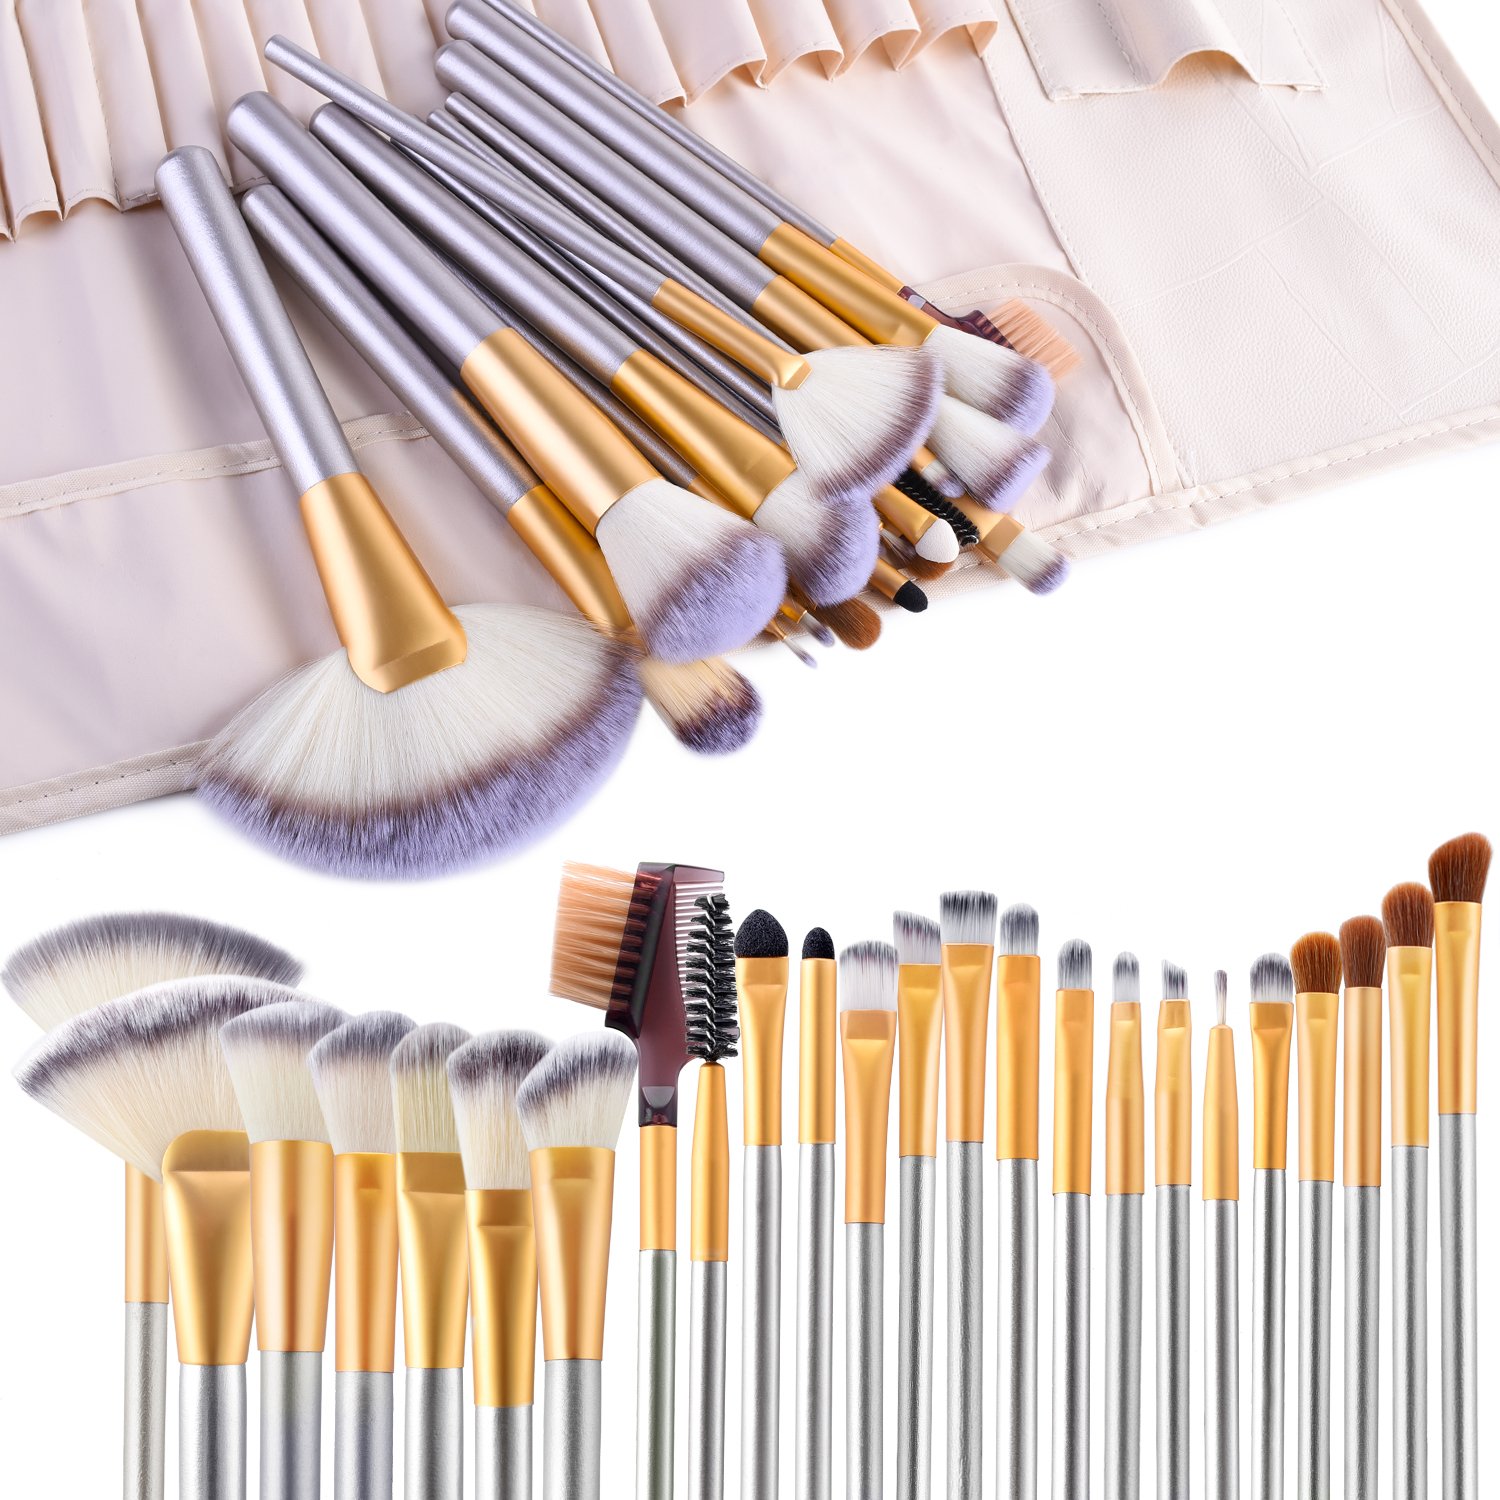 Wholesale Facial Eyeshadow Eye 24 Piece All in One Makeup Brush Set with Wooden Handle